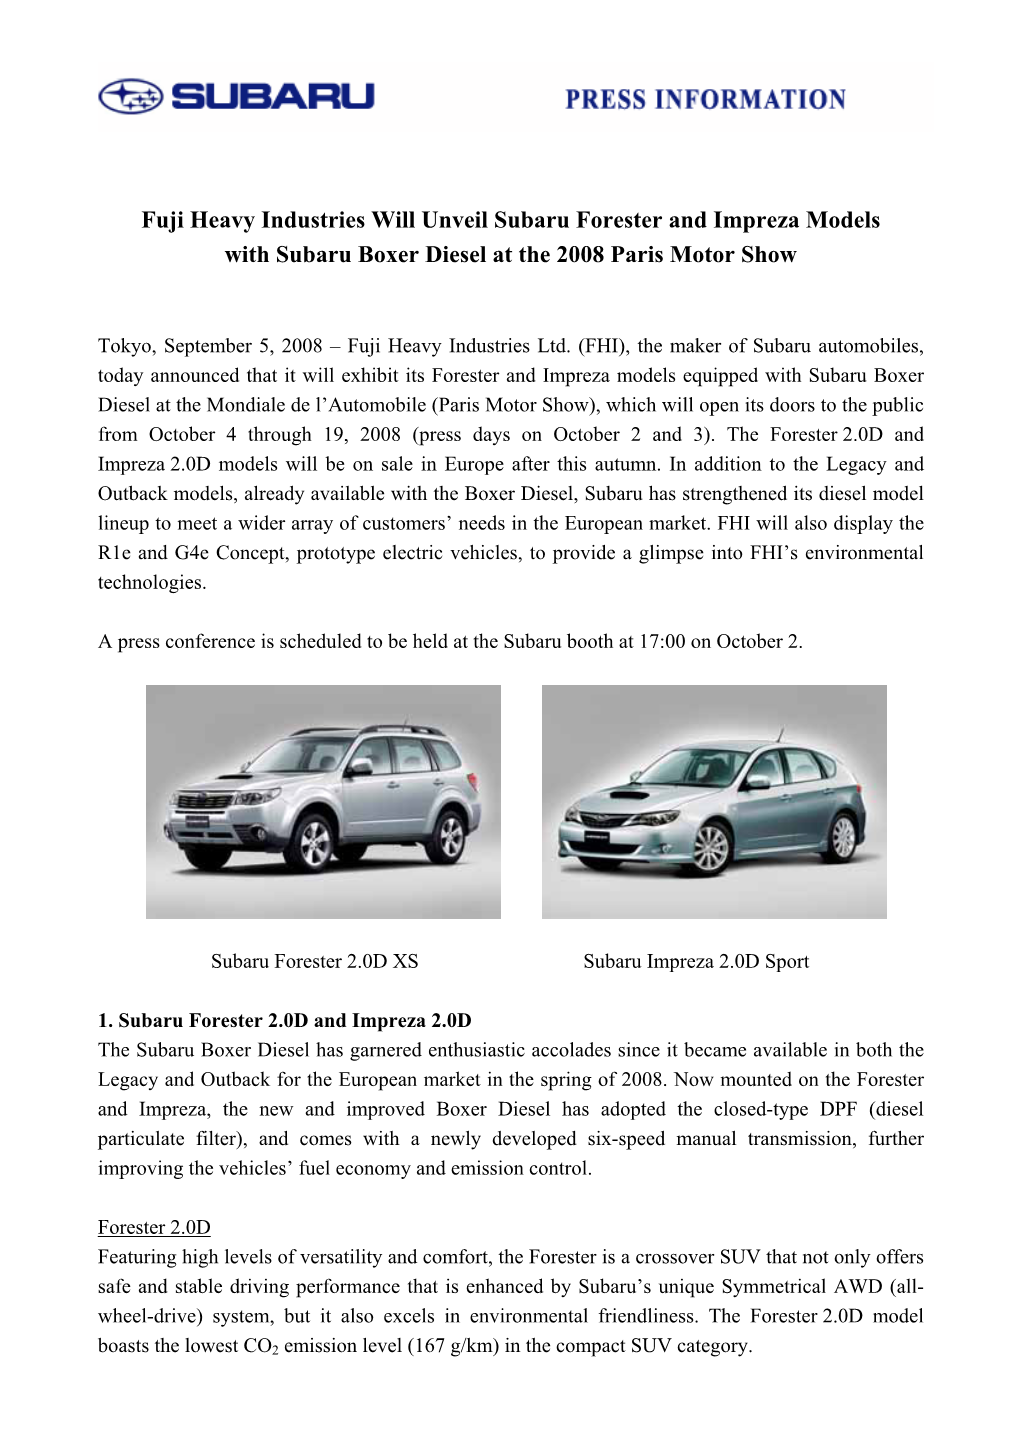 Fuji Heavy Industries Will Unveil Subaru Forester and Impreza With